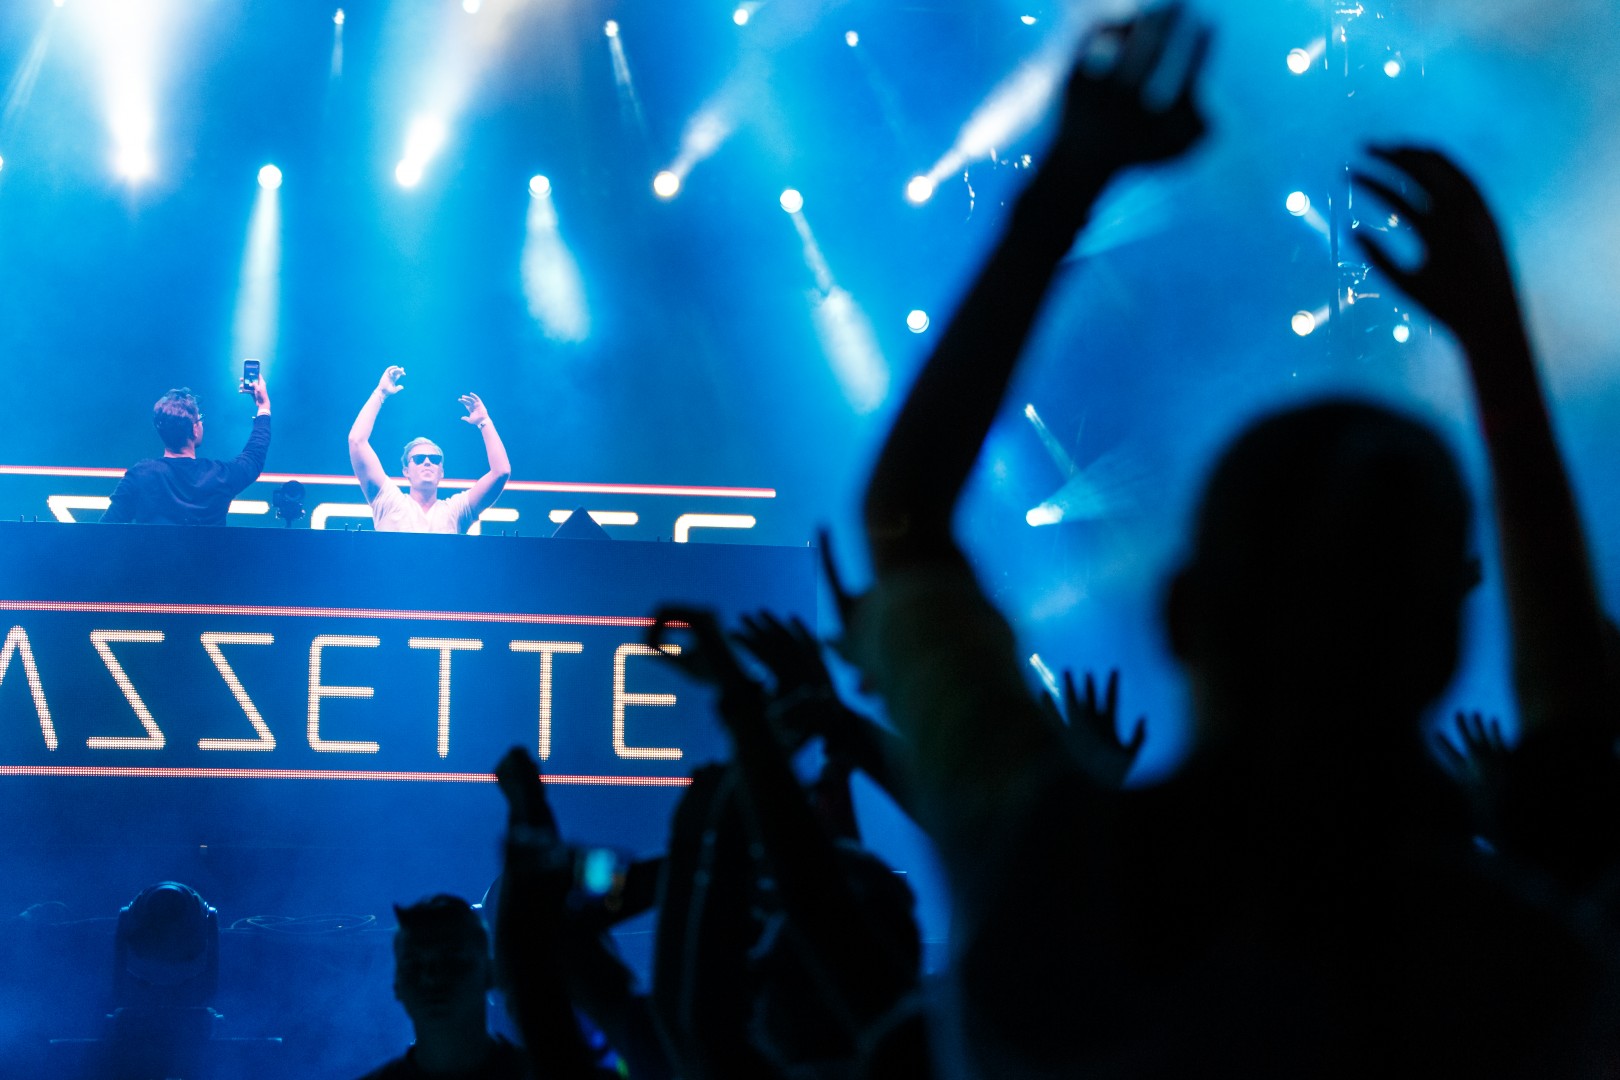 Cazzette at Cluj Arena in Cluj-Napoca on August 1, 2015 (92f61116df)